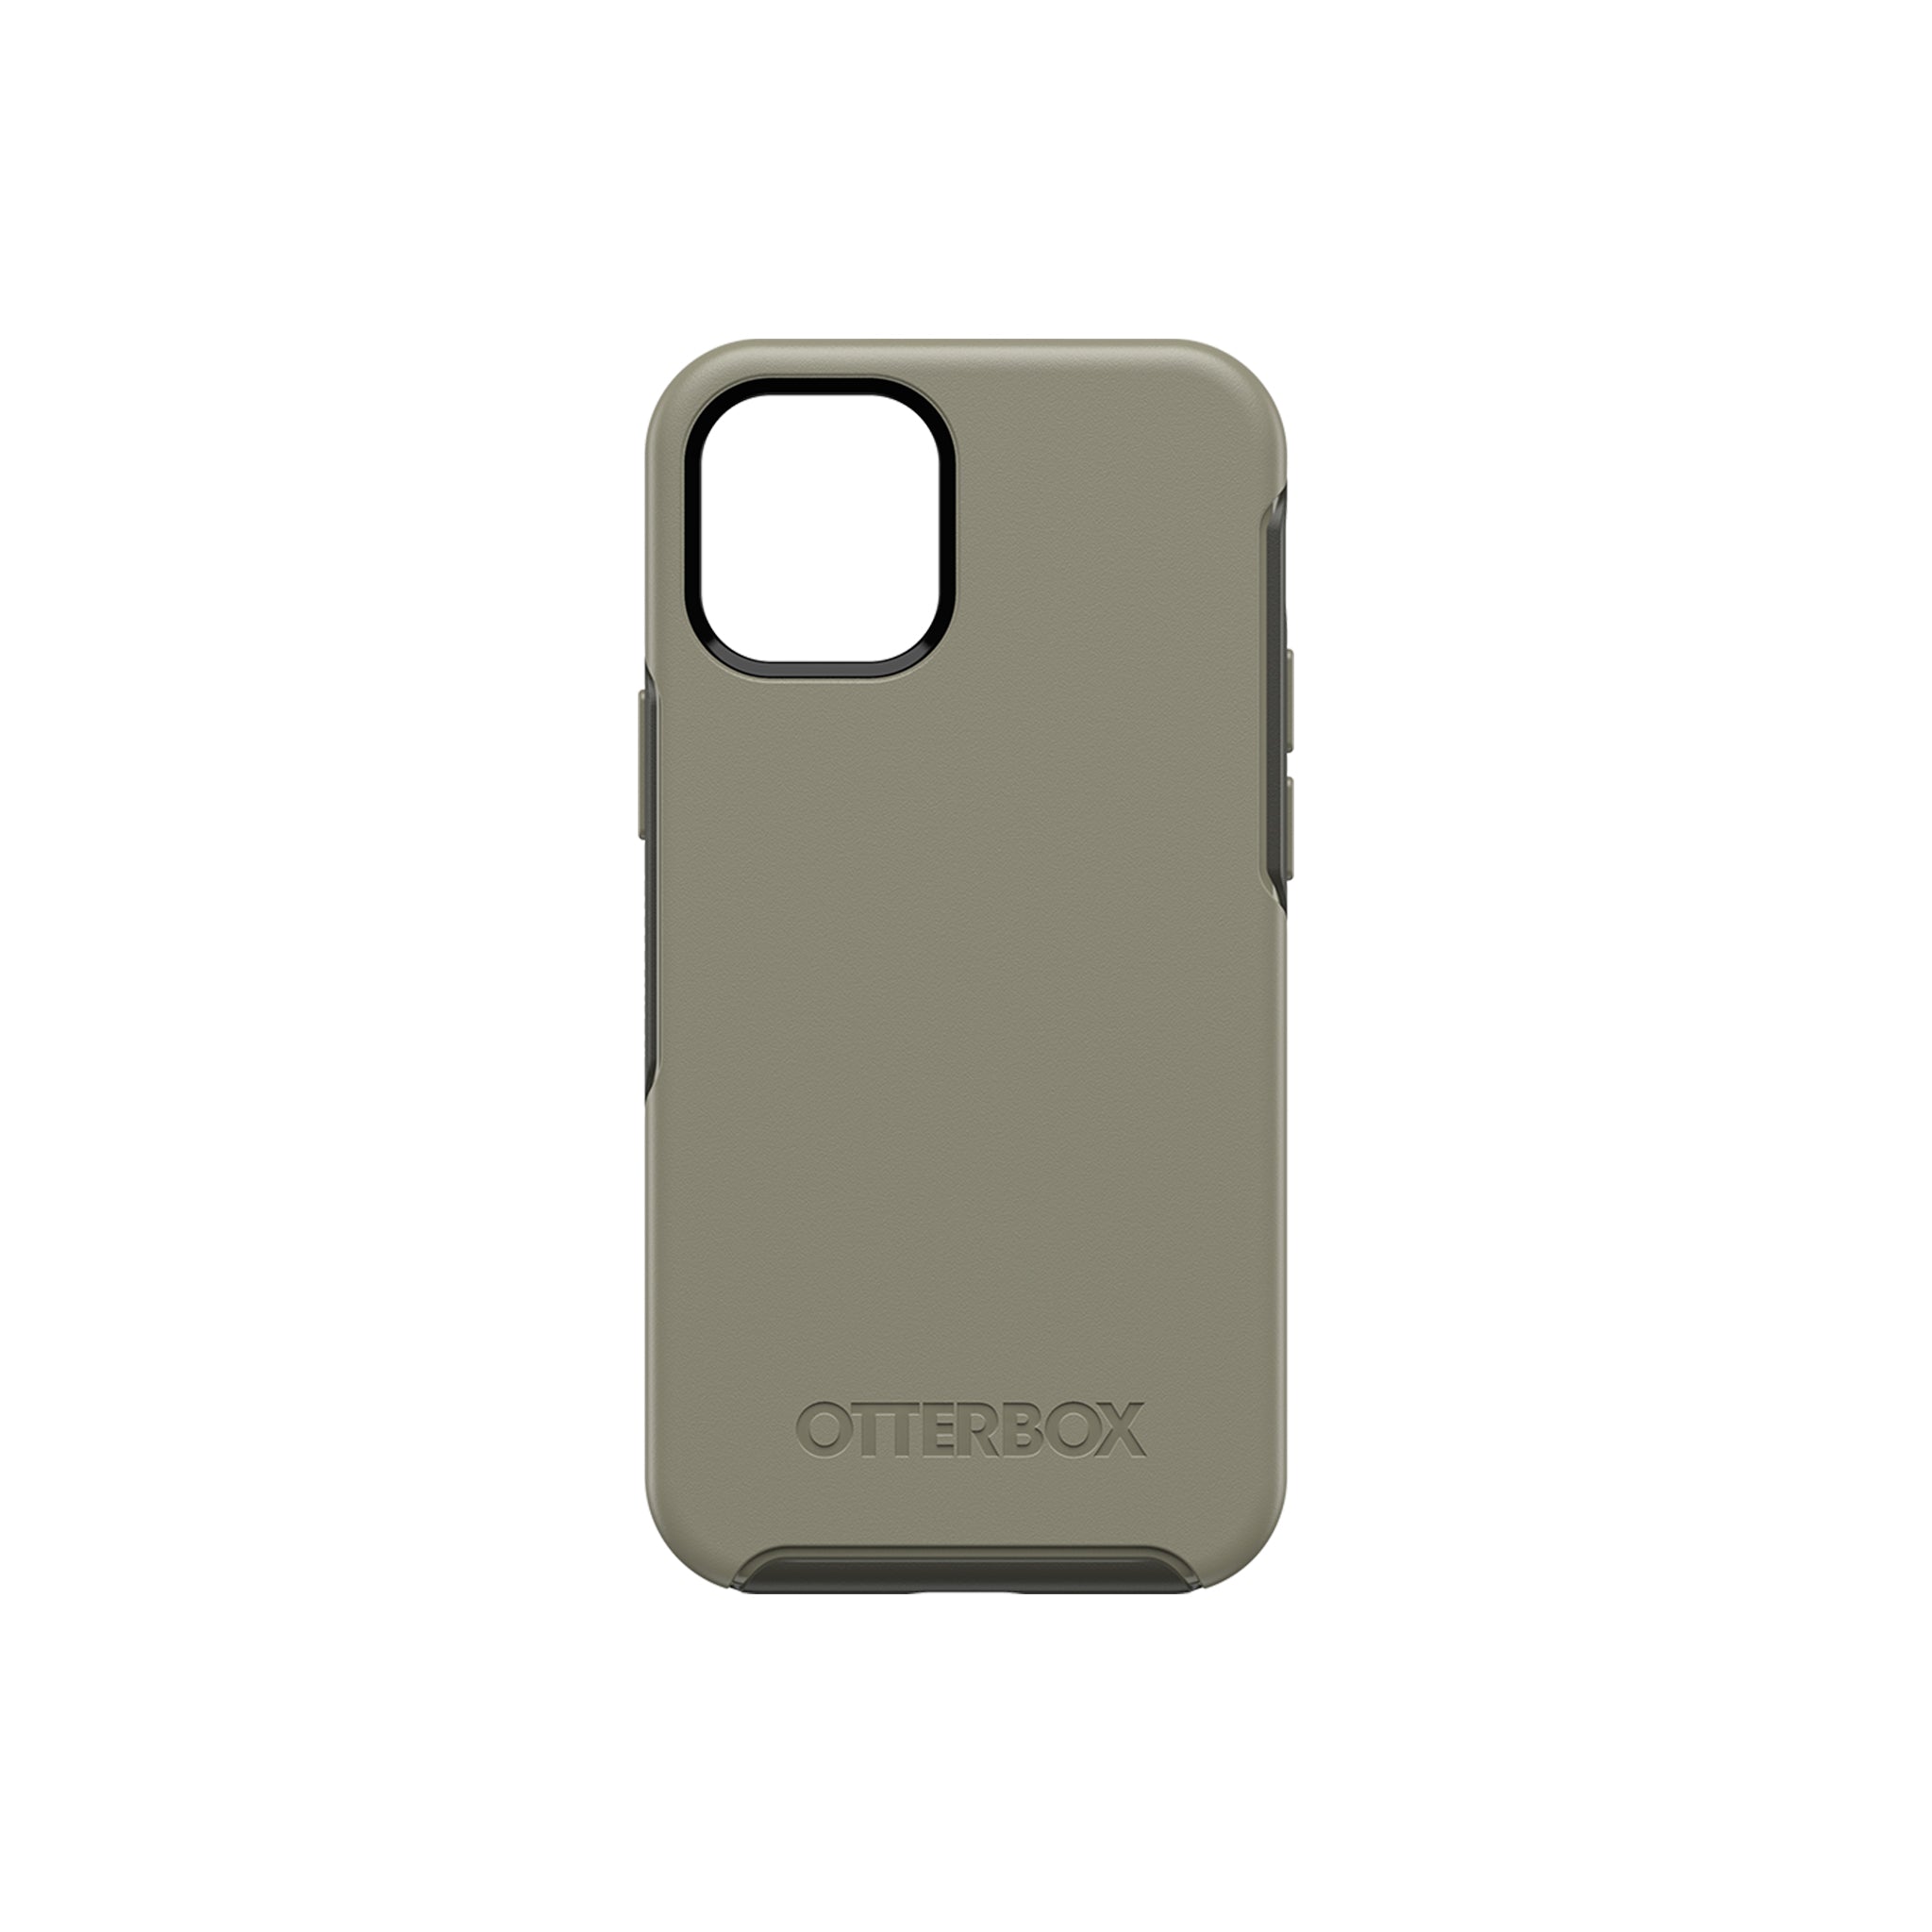 OtterBox - Symmetry for iPhone 12 mini - Earl Grey